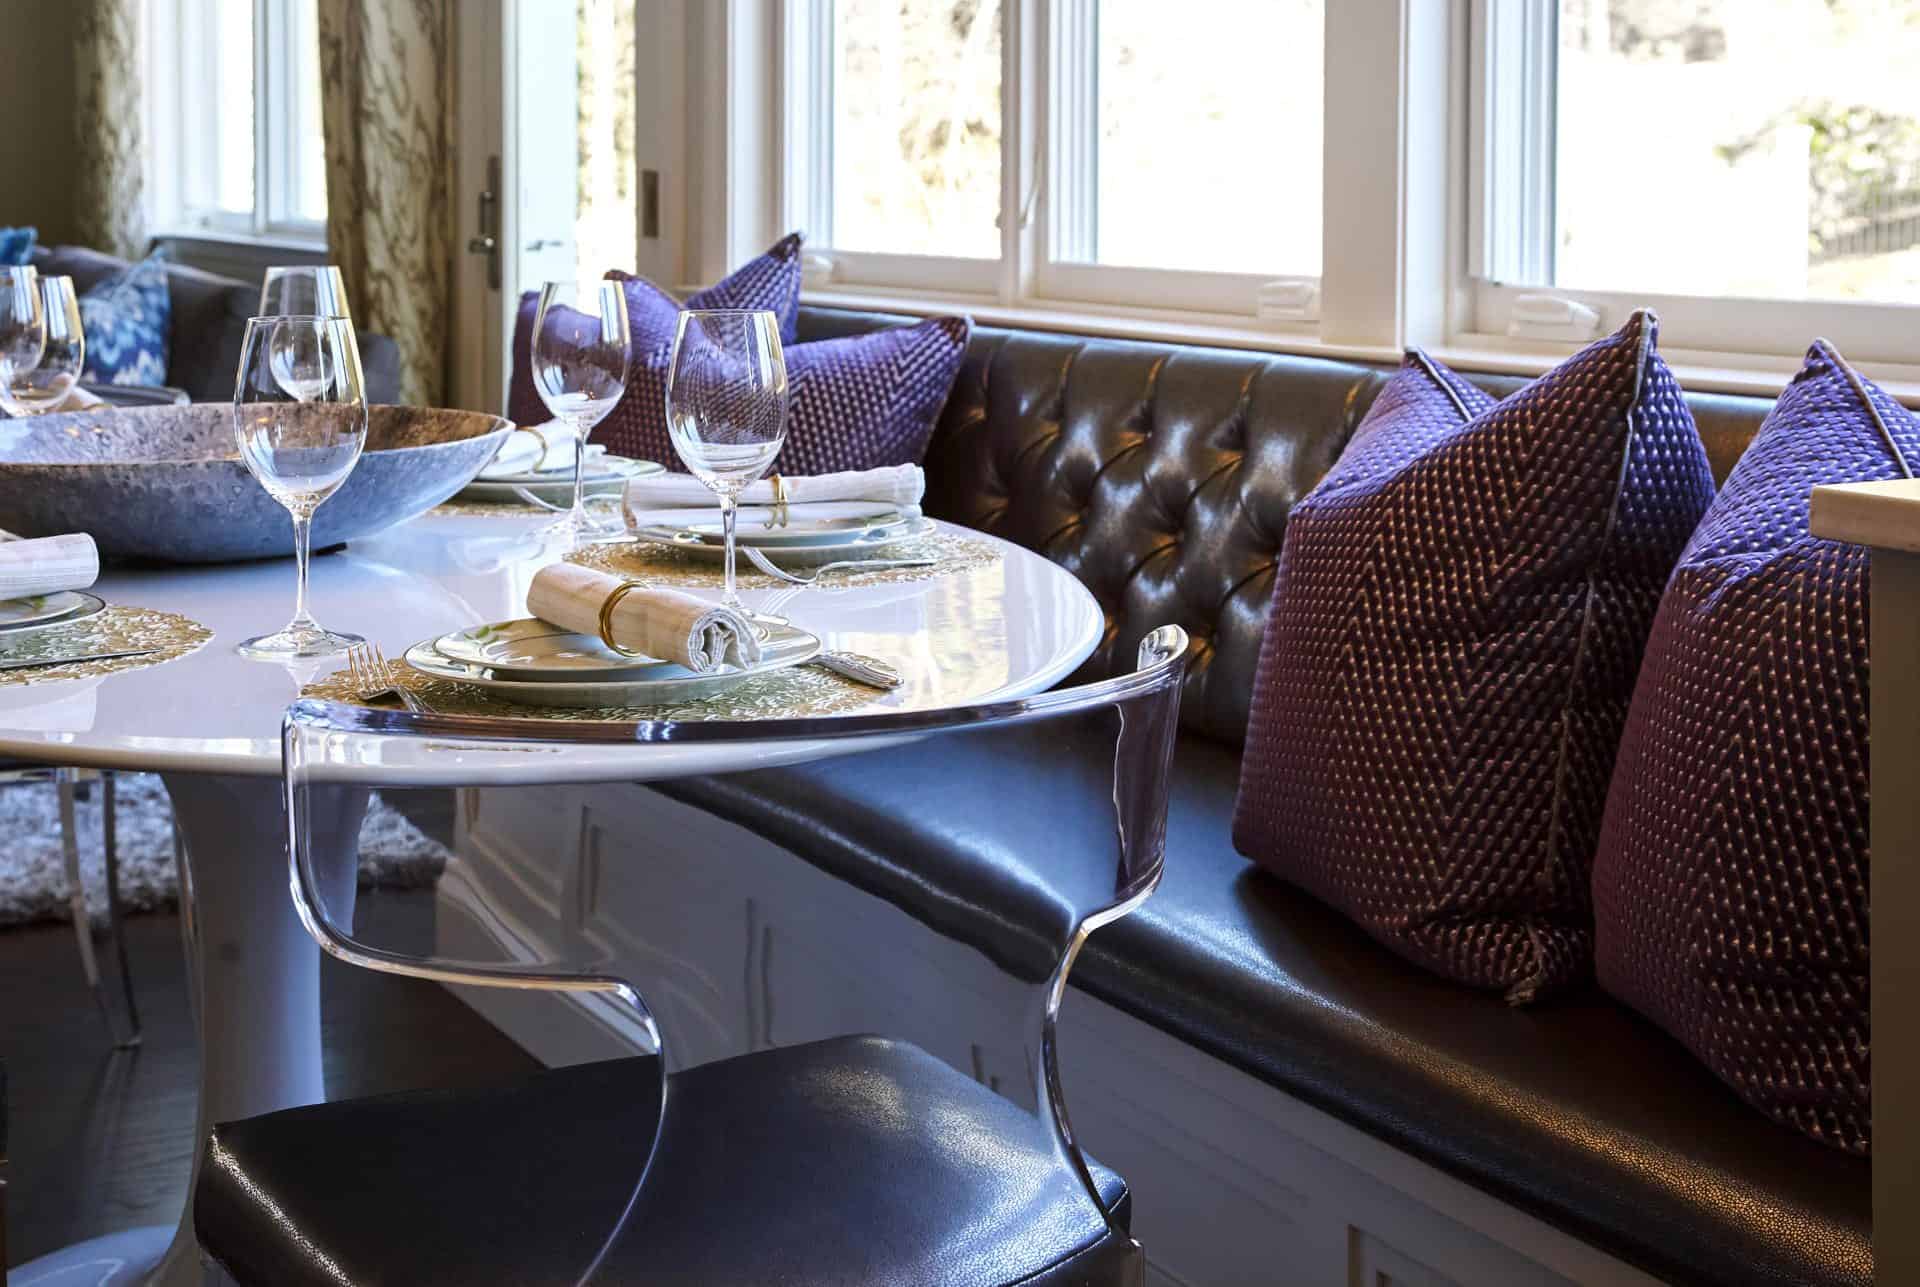 Banquette with Purple Leather Cushions and Purple Pillows and Lucite Chairs